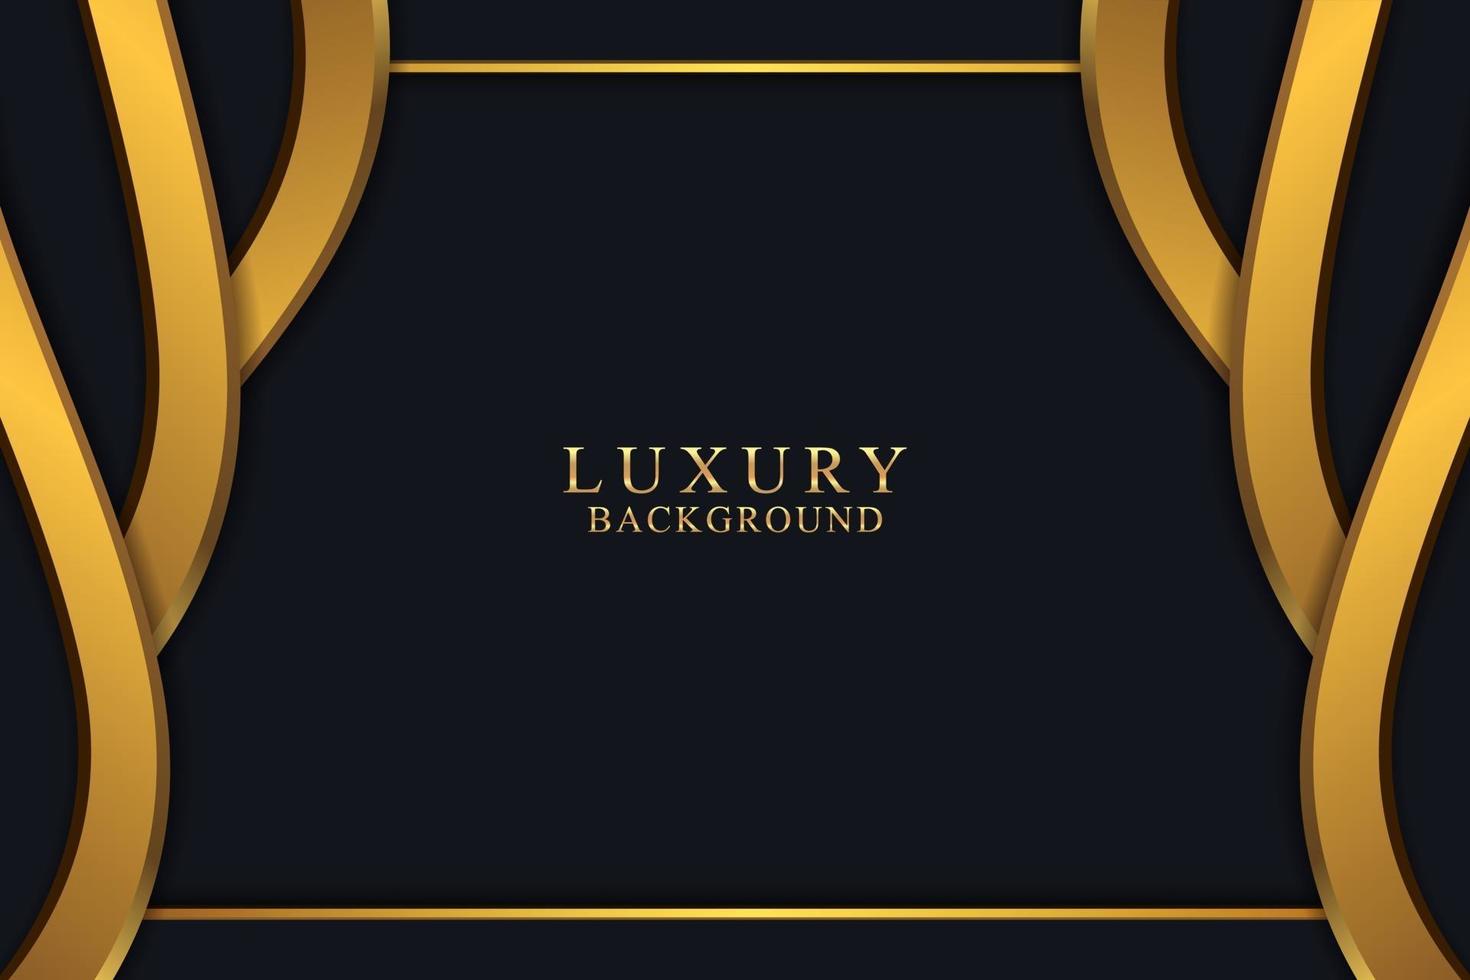 Elegant luxury background concept with black and gold texture vector